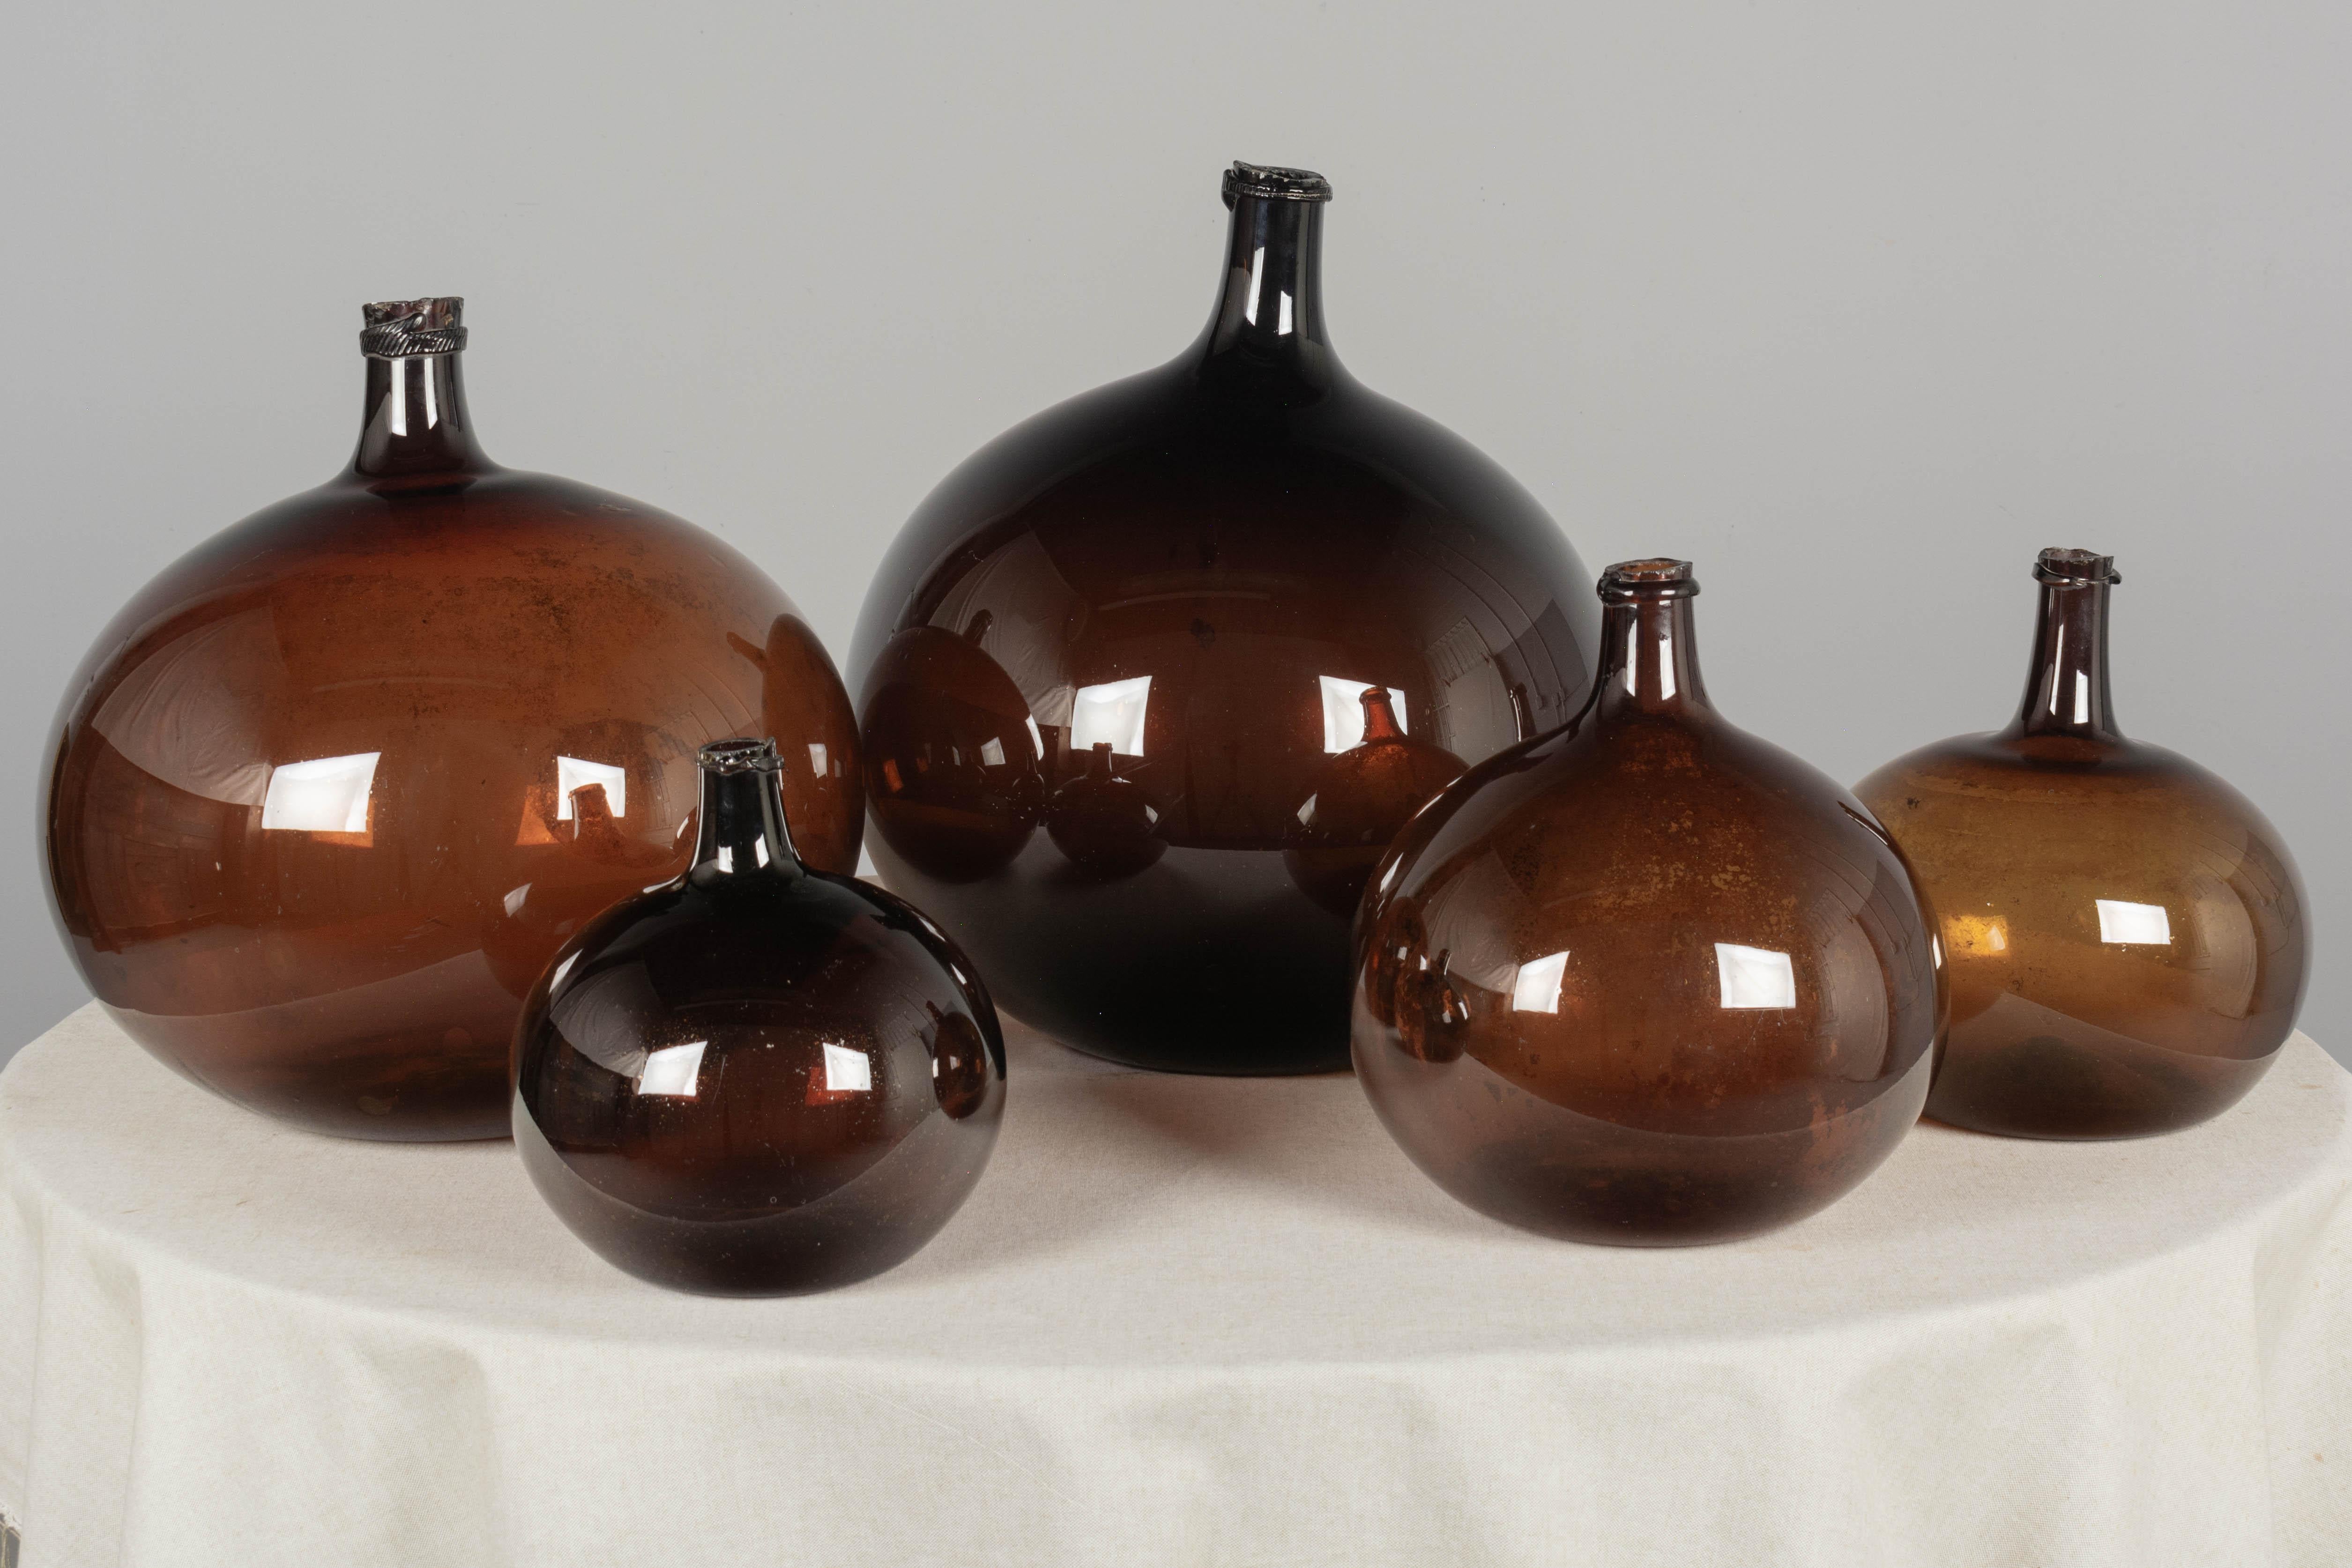 A set of five 19th century French globular form amber glass demijohn bottles with air bubbles typical of handblown glass. Circa 1850-1860
Dimensions (left to right): 
18